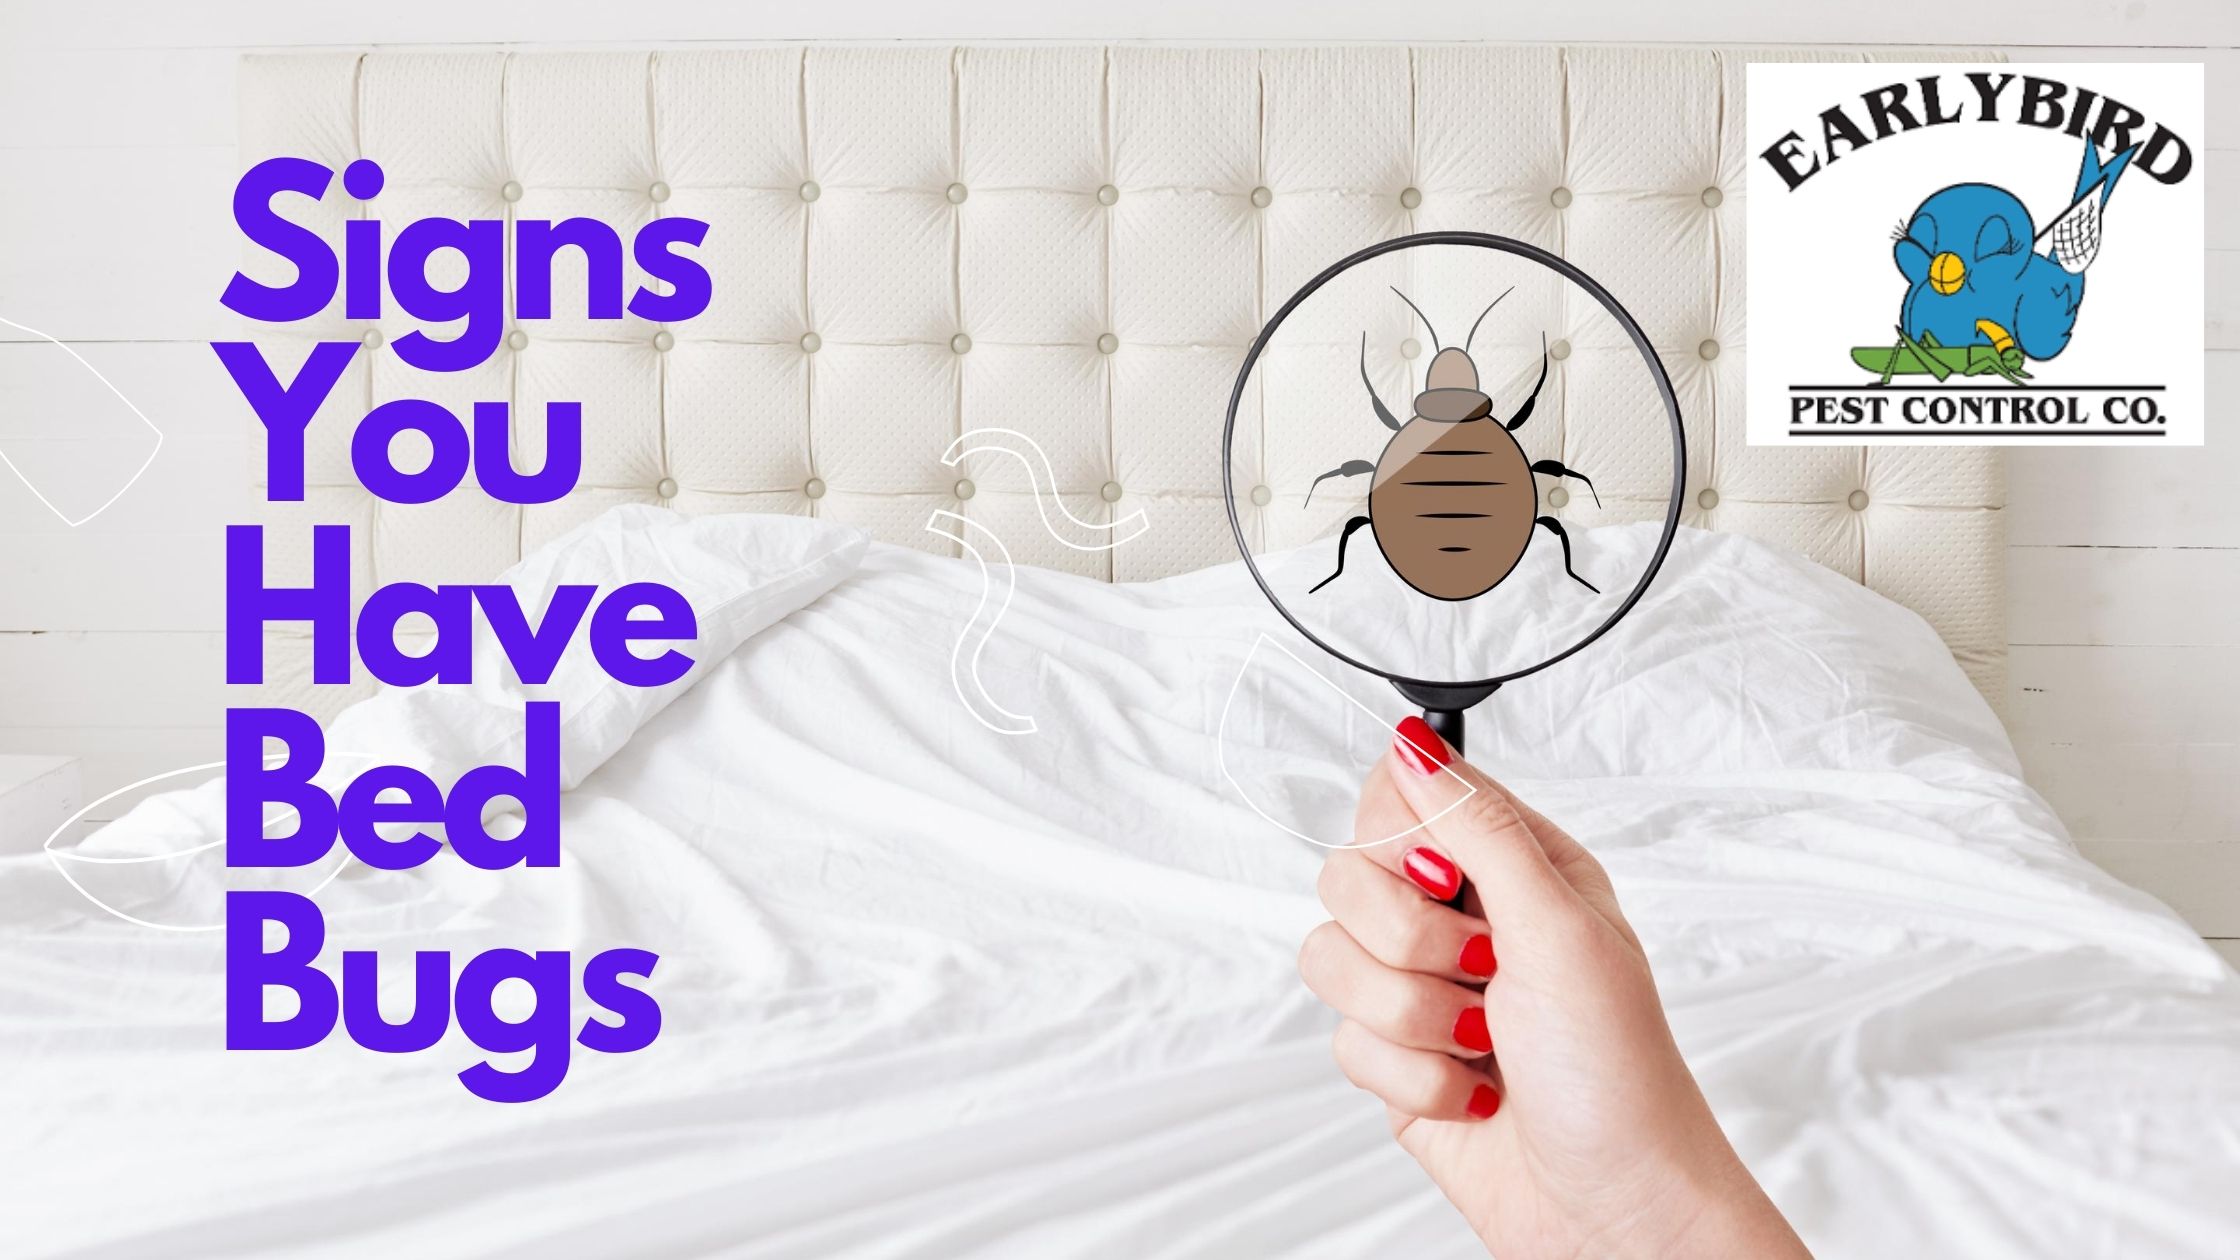 Signs You Have Bed Bugs